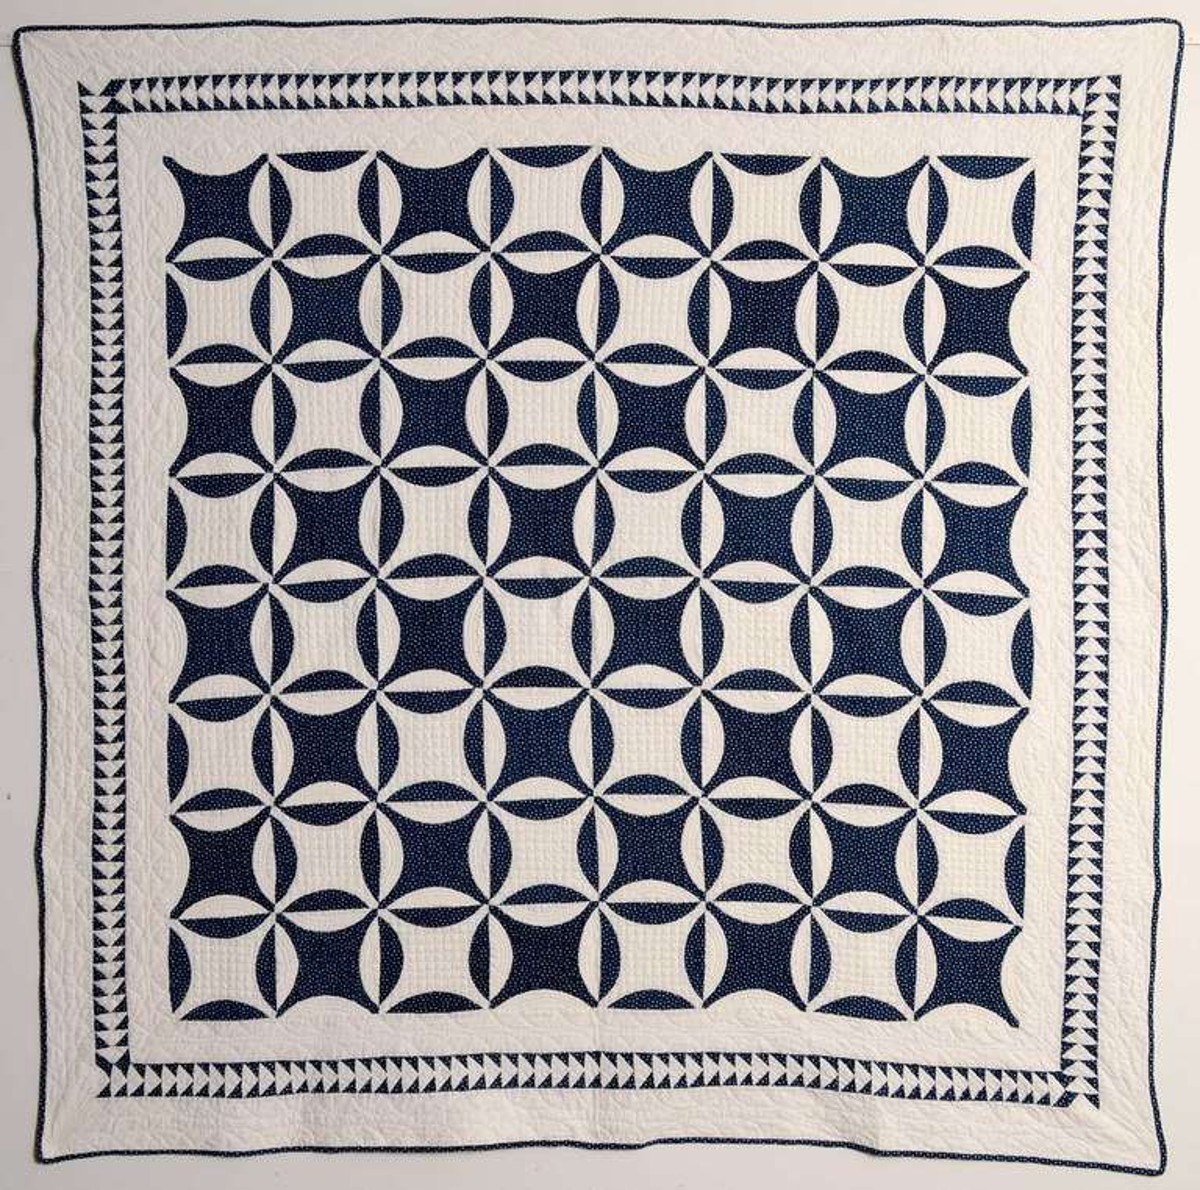 A blue and white Rob Peter to Pay Paul quilt